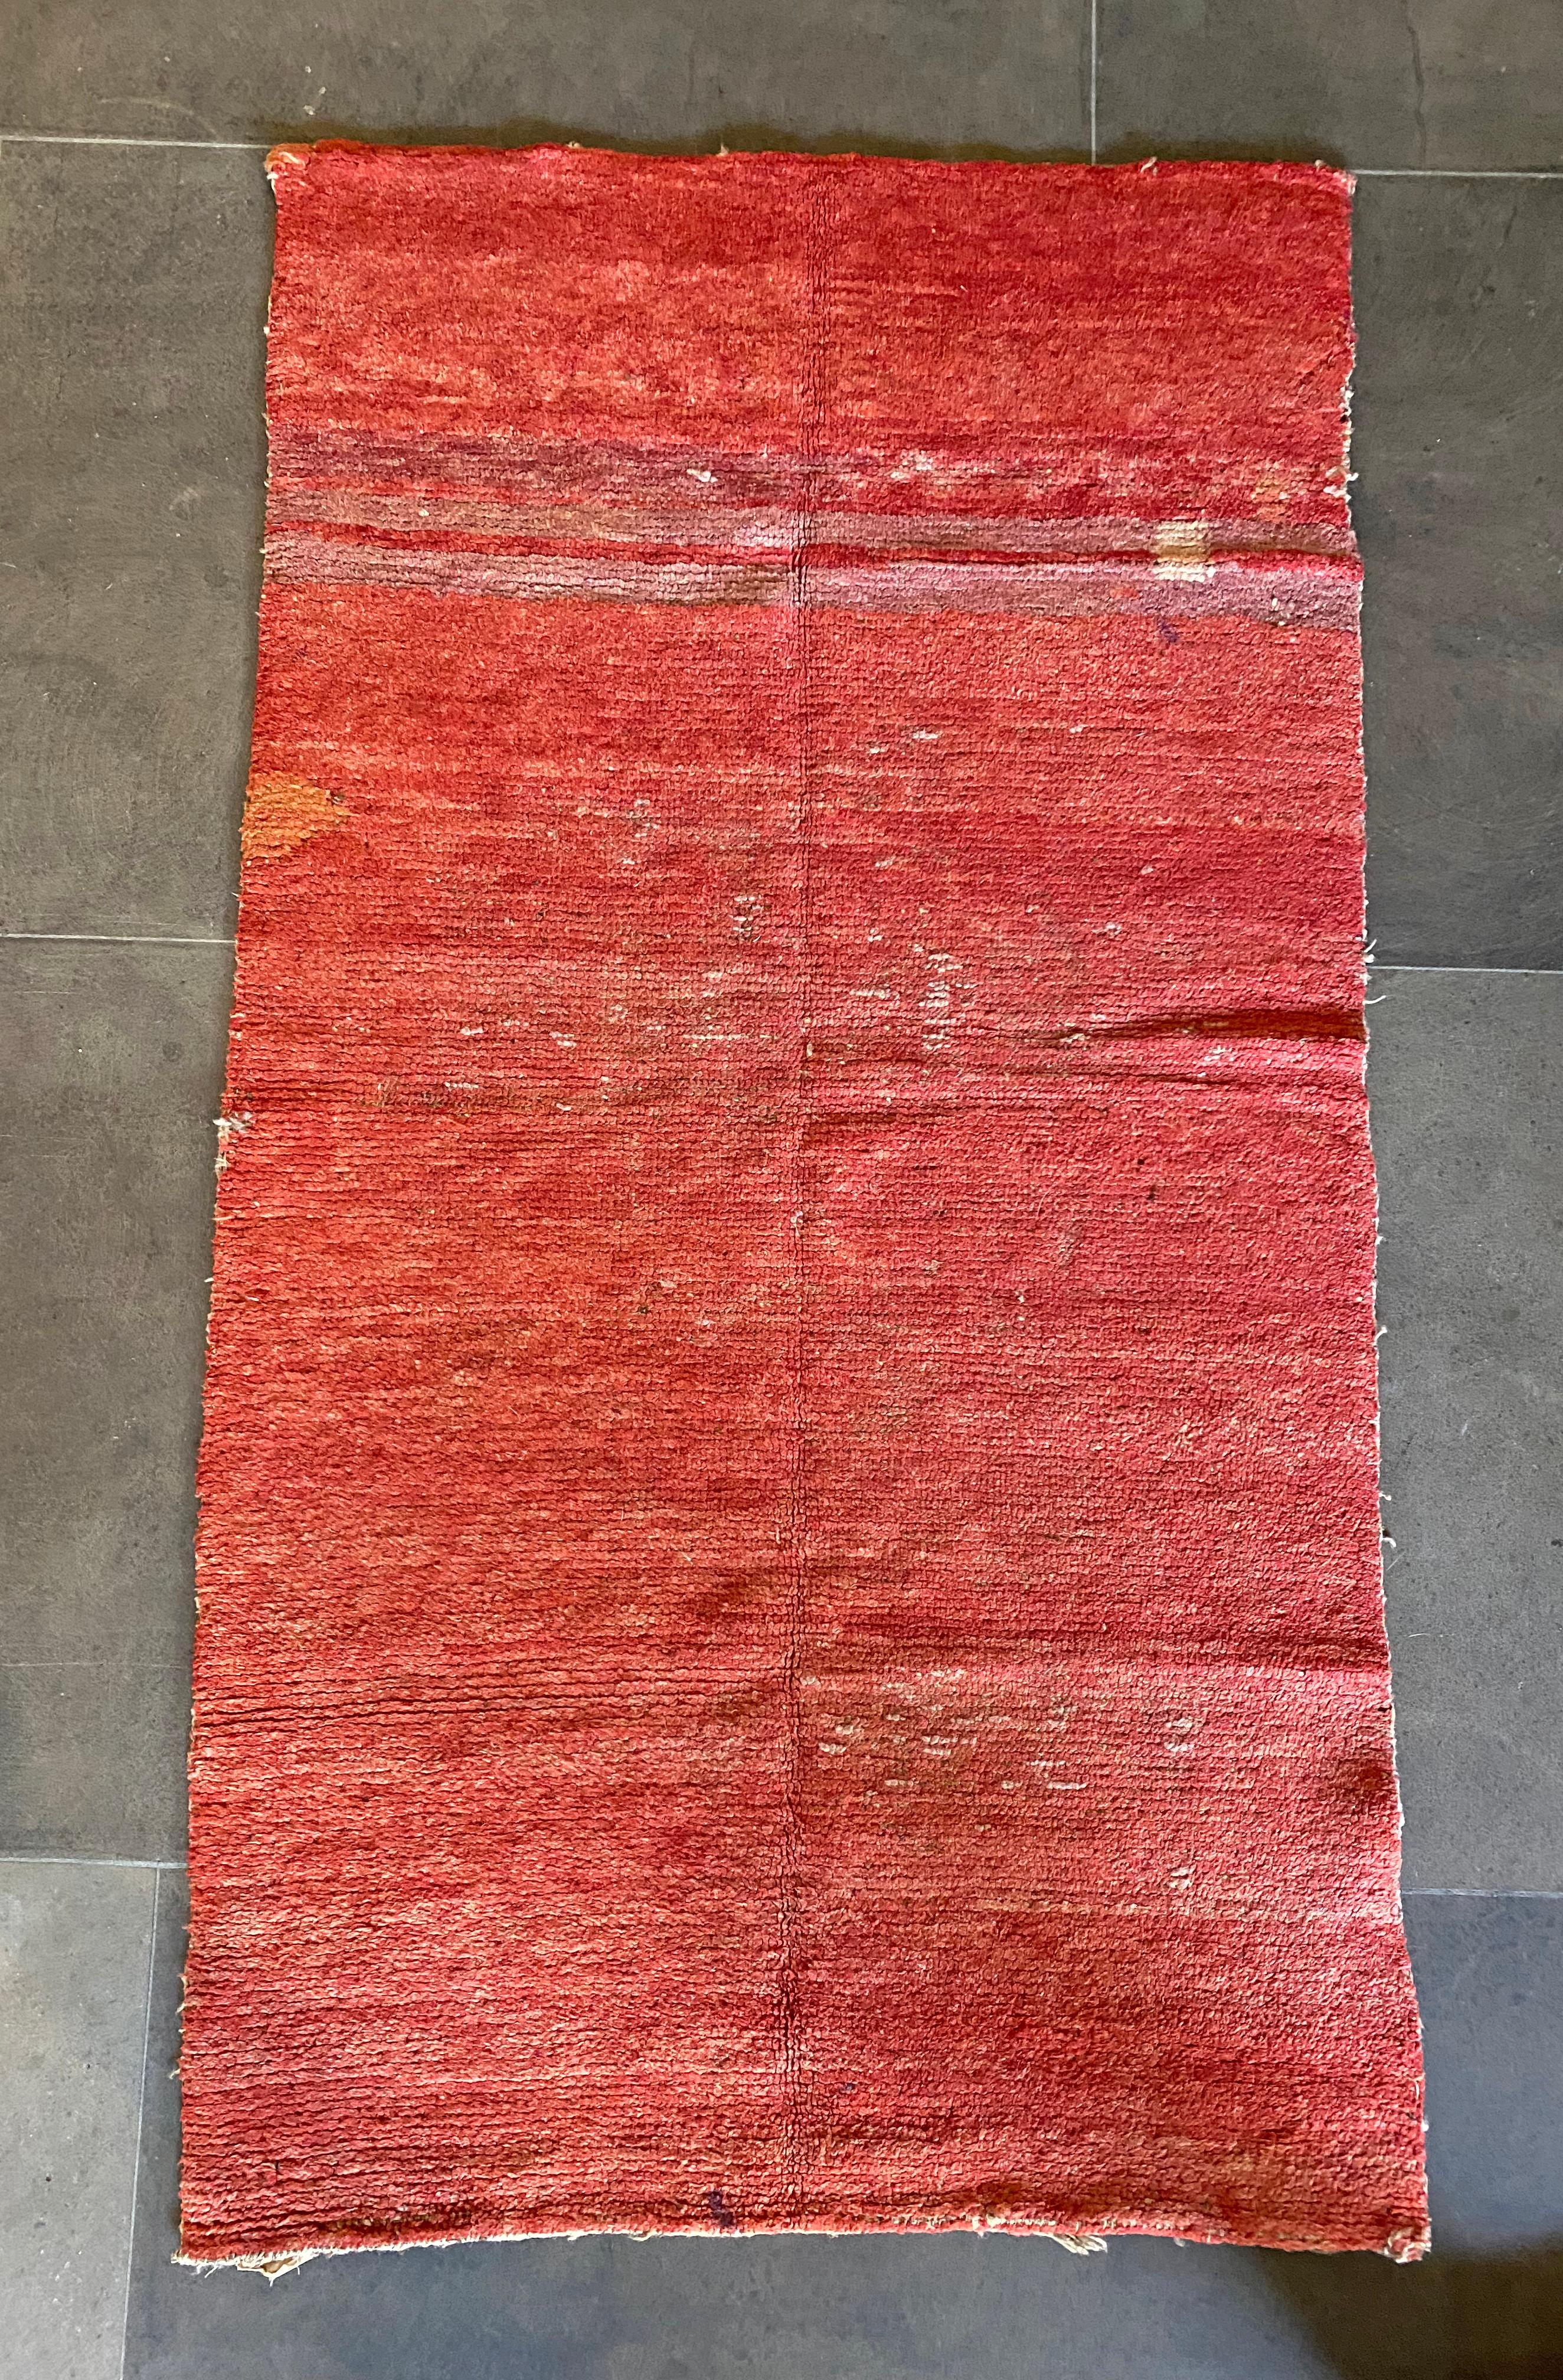 This rug from the early part of the 20th century is made from naturally dyed wool from the highlands of Tibet. Wangden is the name of the valley in Tibet where these rugs originate from. Wangden is known for this type of carpet weaving which is